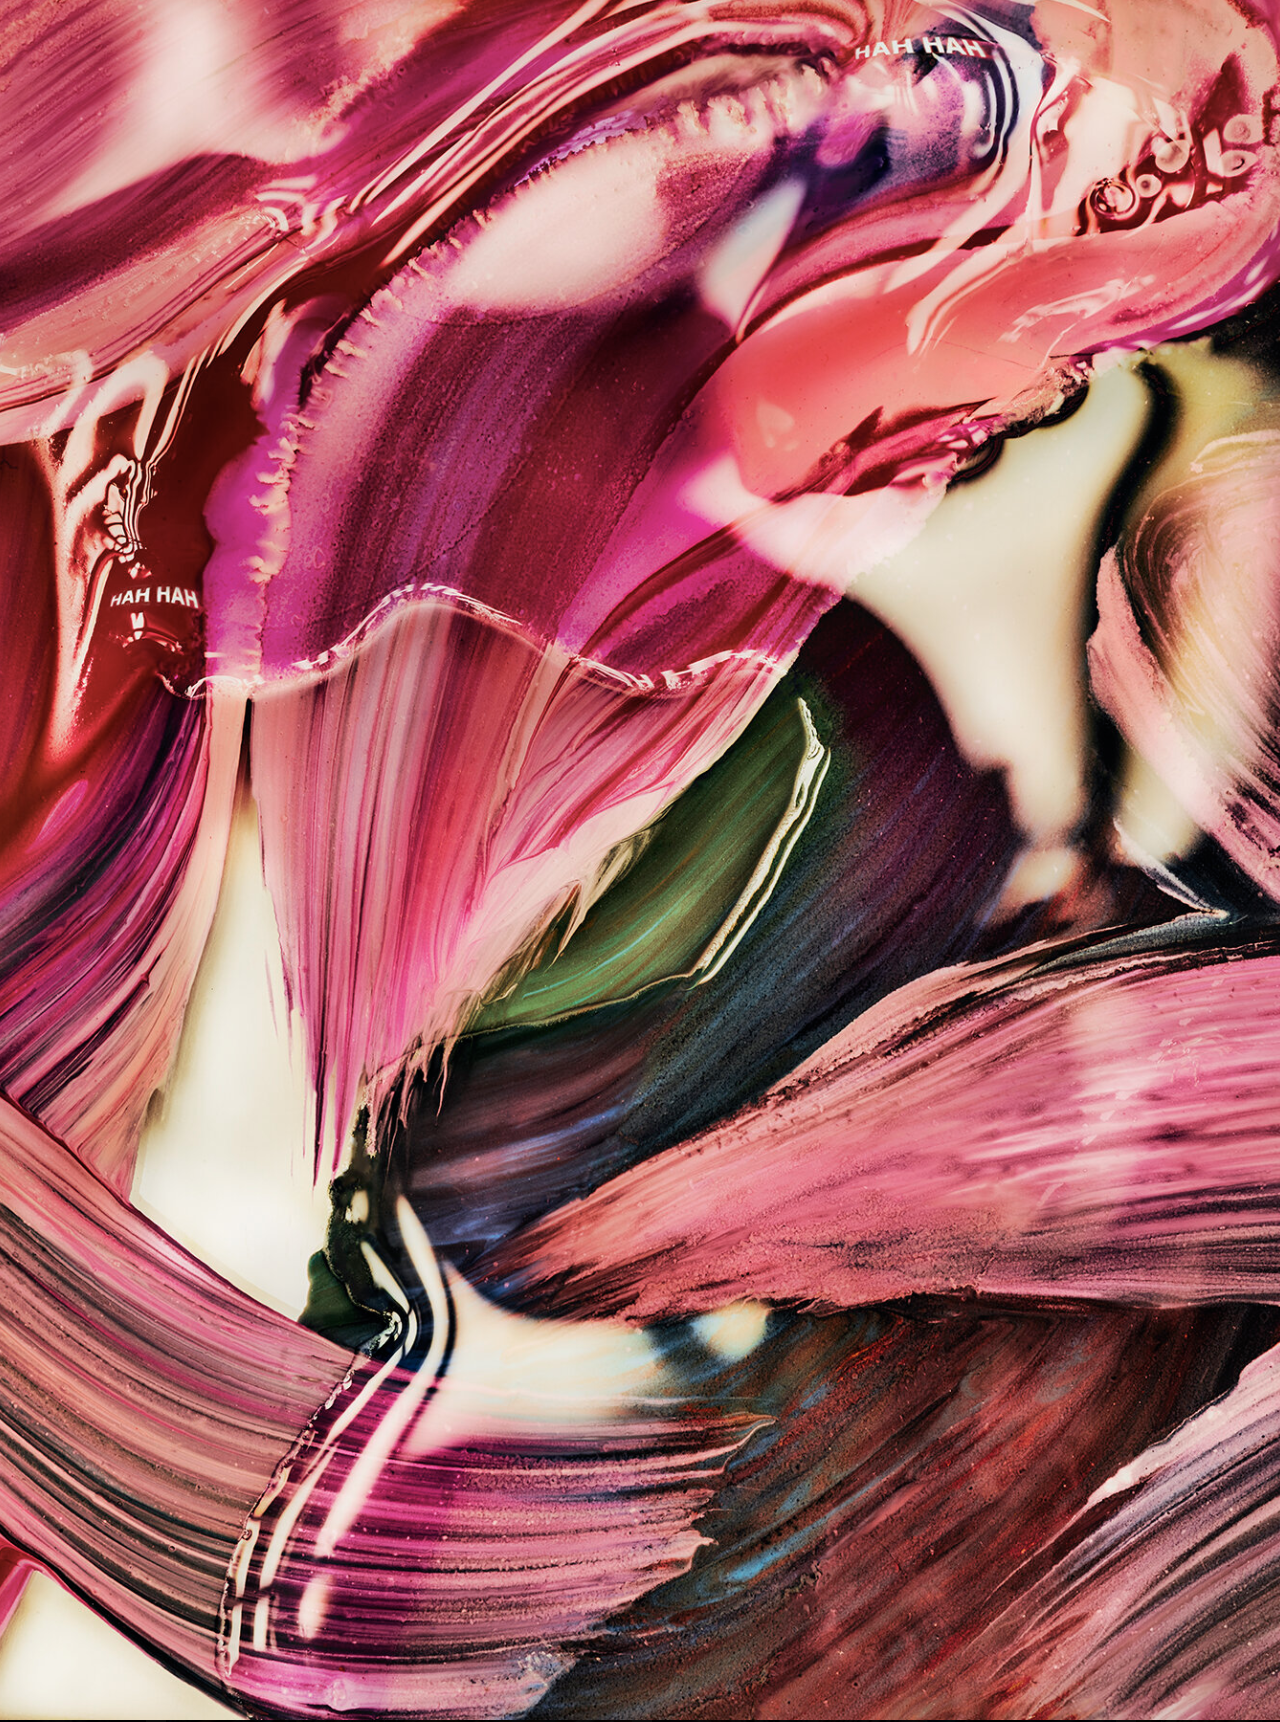 Abstract work with swirling colors in shades of pink, purple, red and green